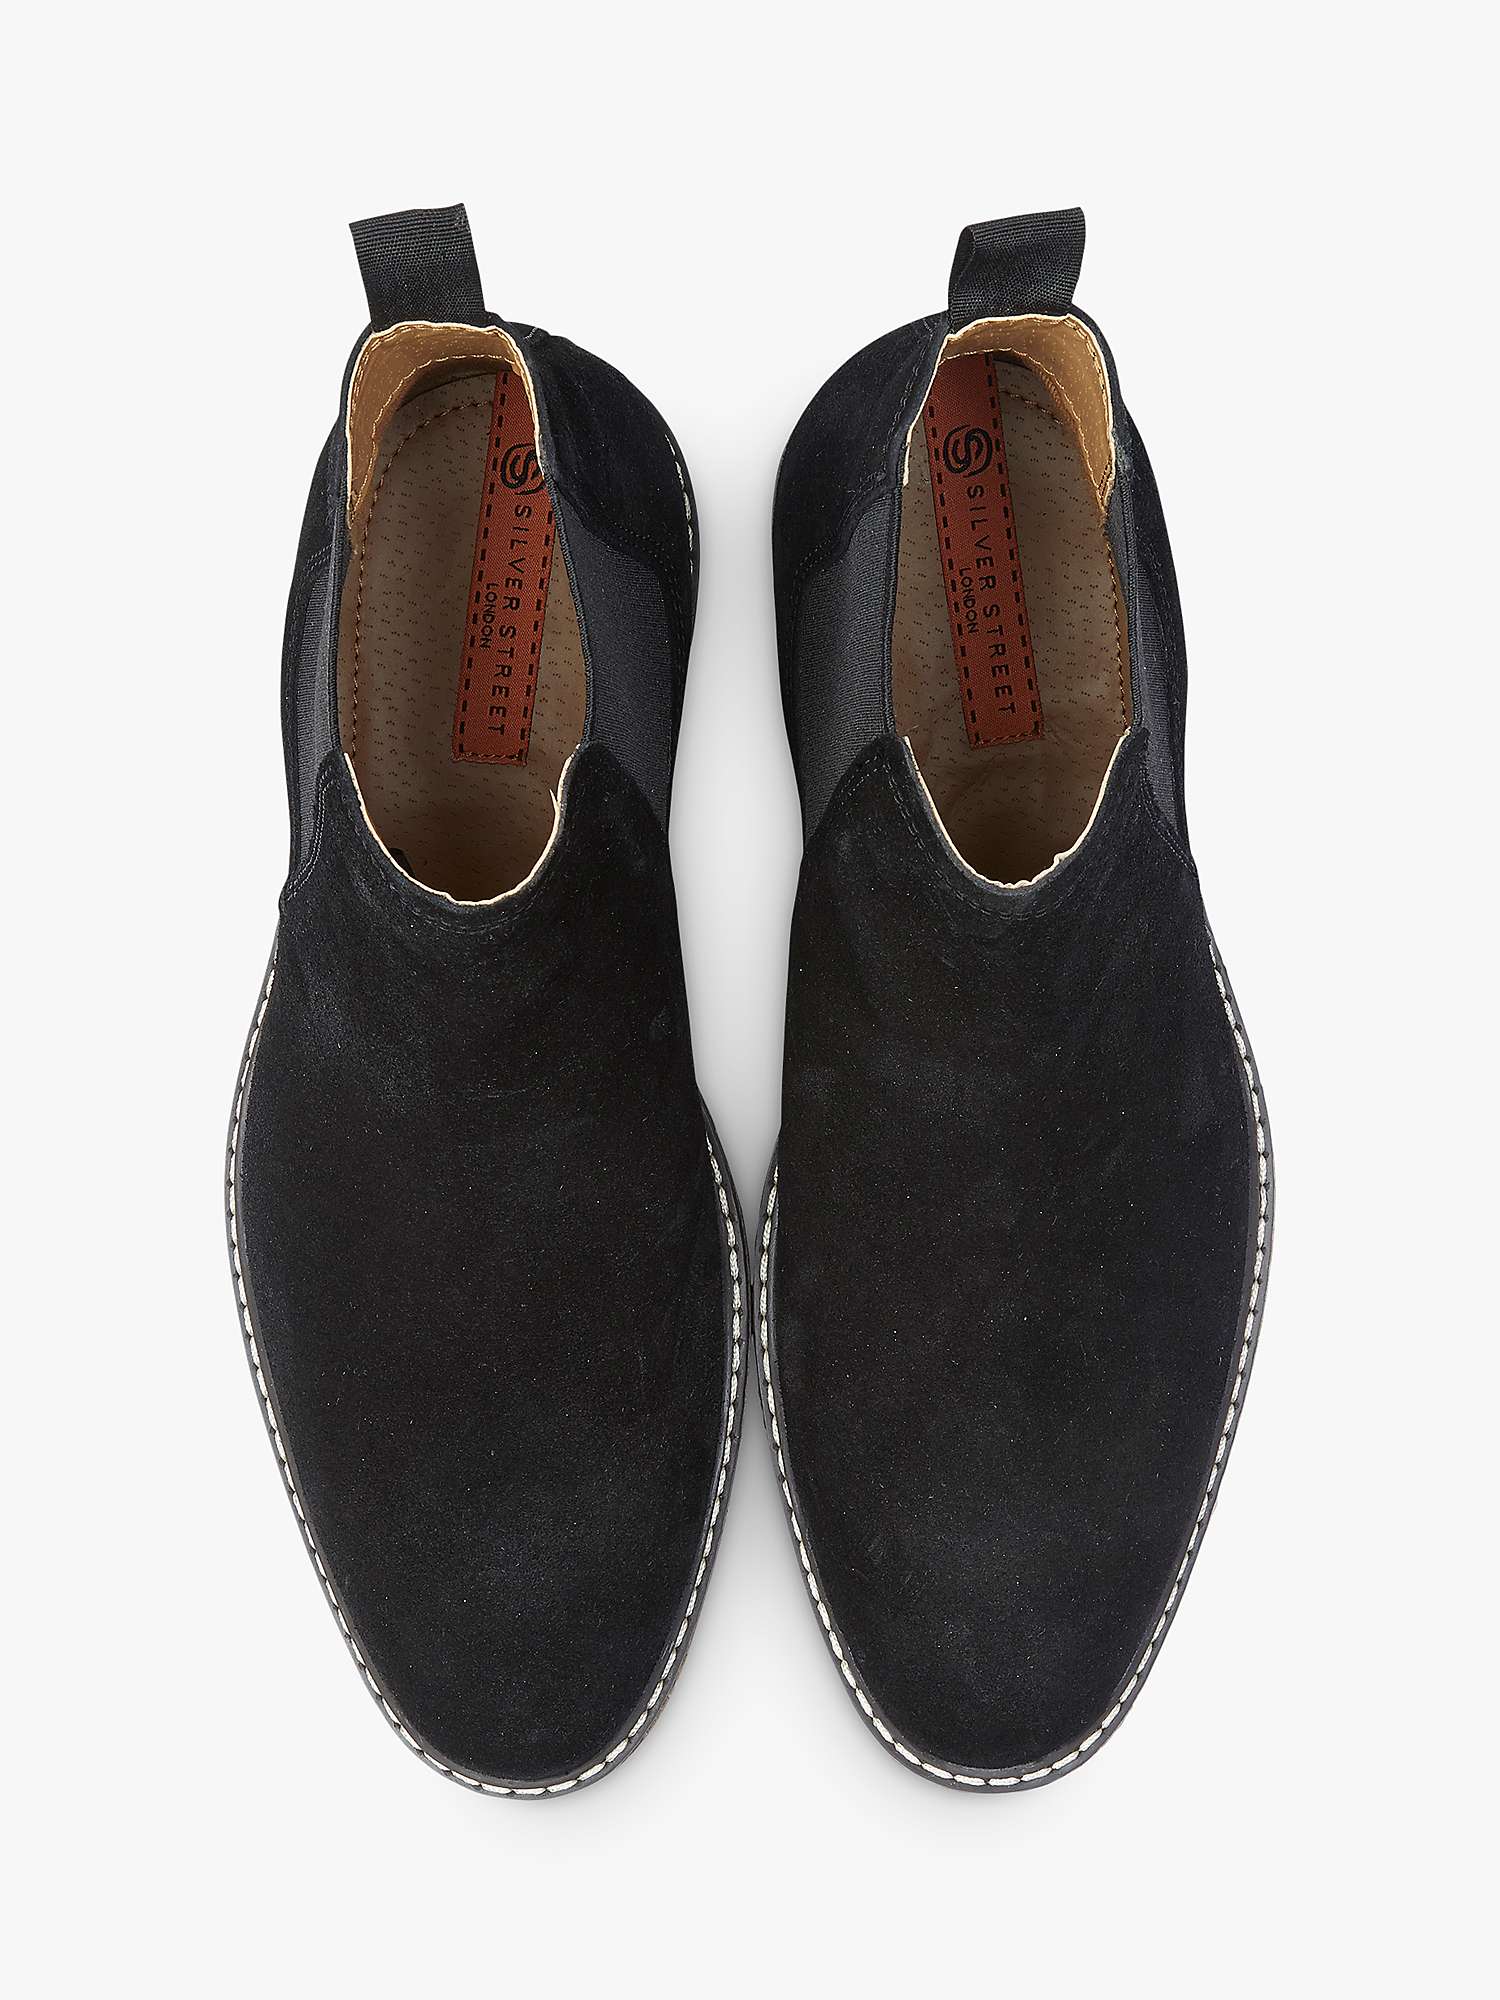 Buy Silver Street London Pimlico Suede Chelsea Boots Online at johnlewis.com